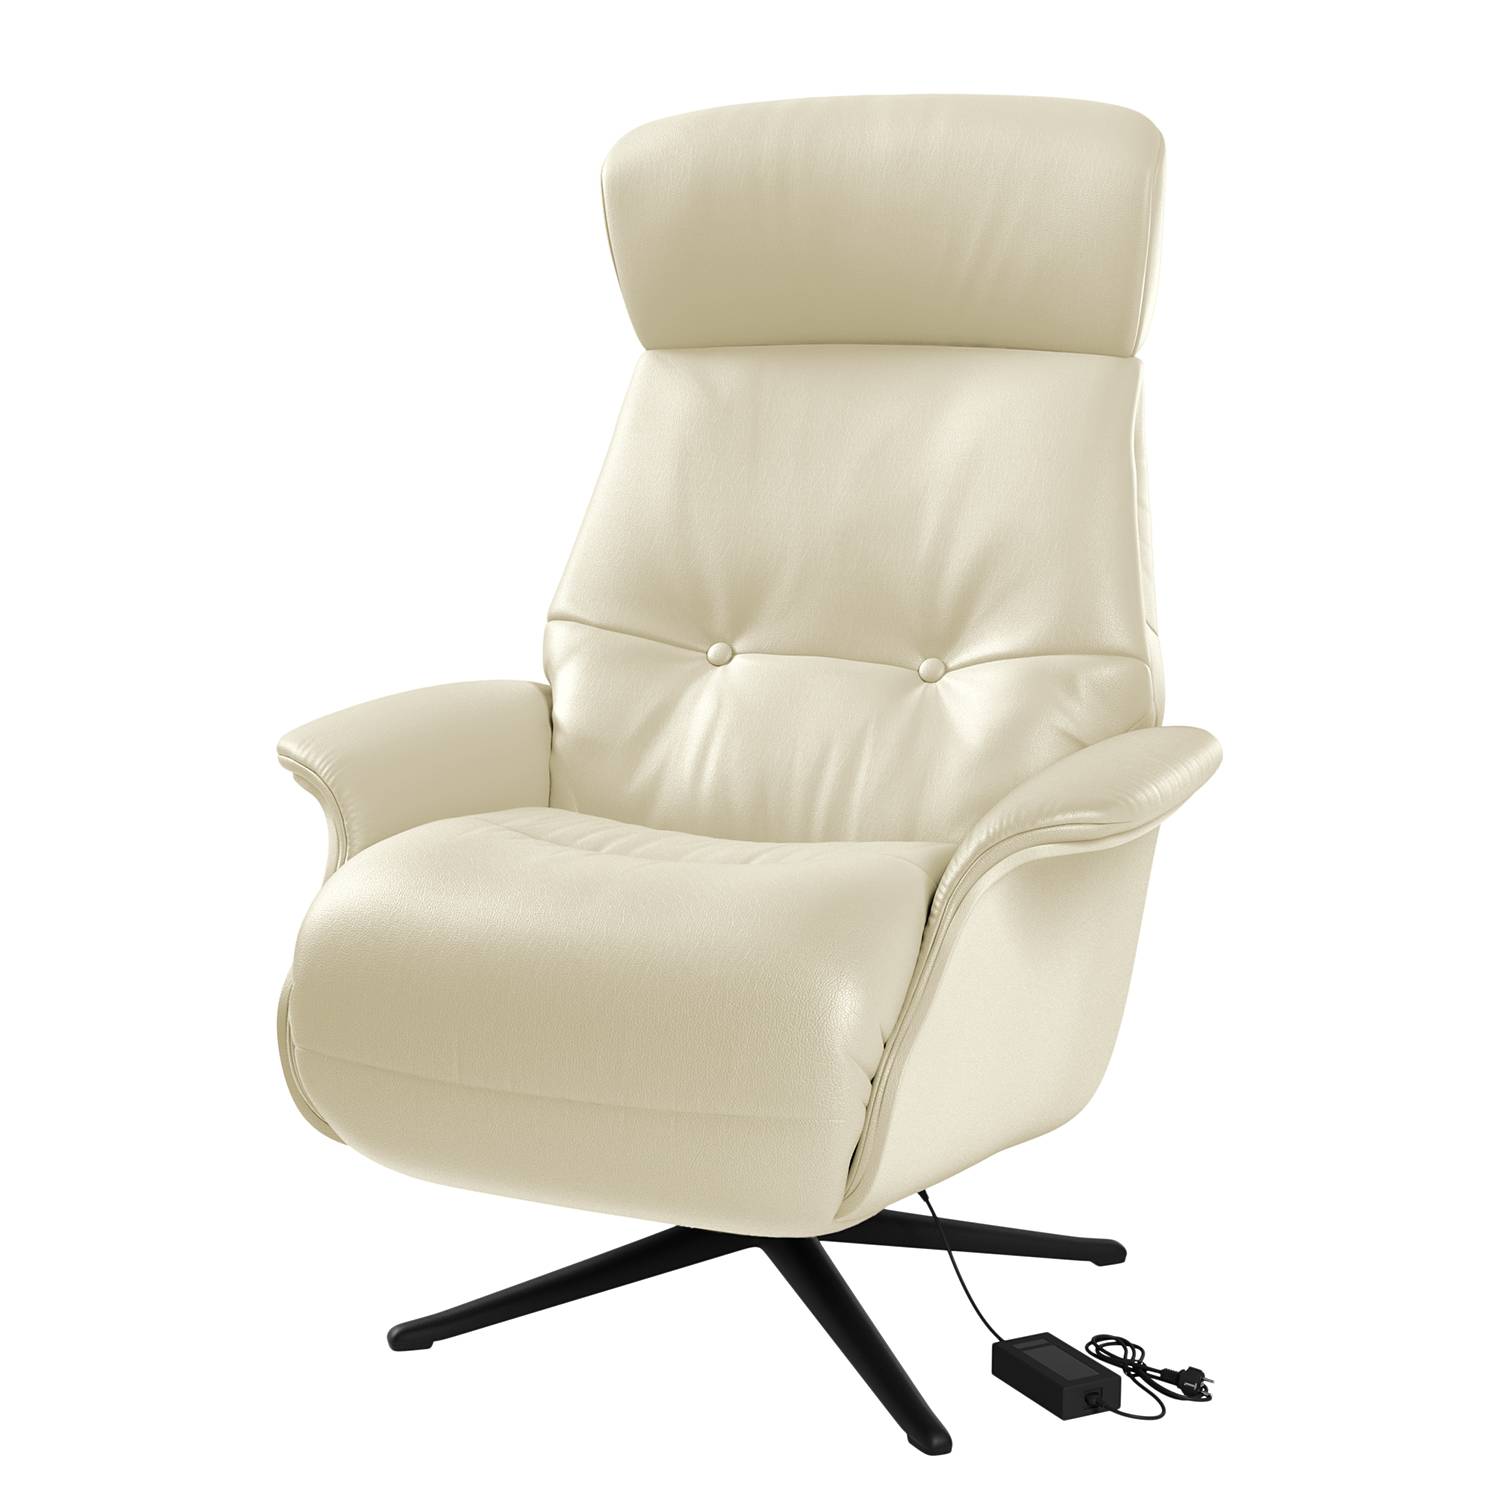 Image of Fauteuil relax Anderson VI 000000001000131458